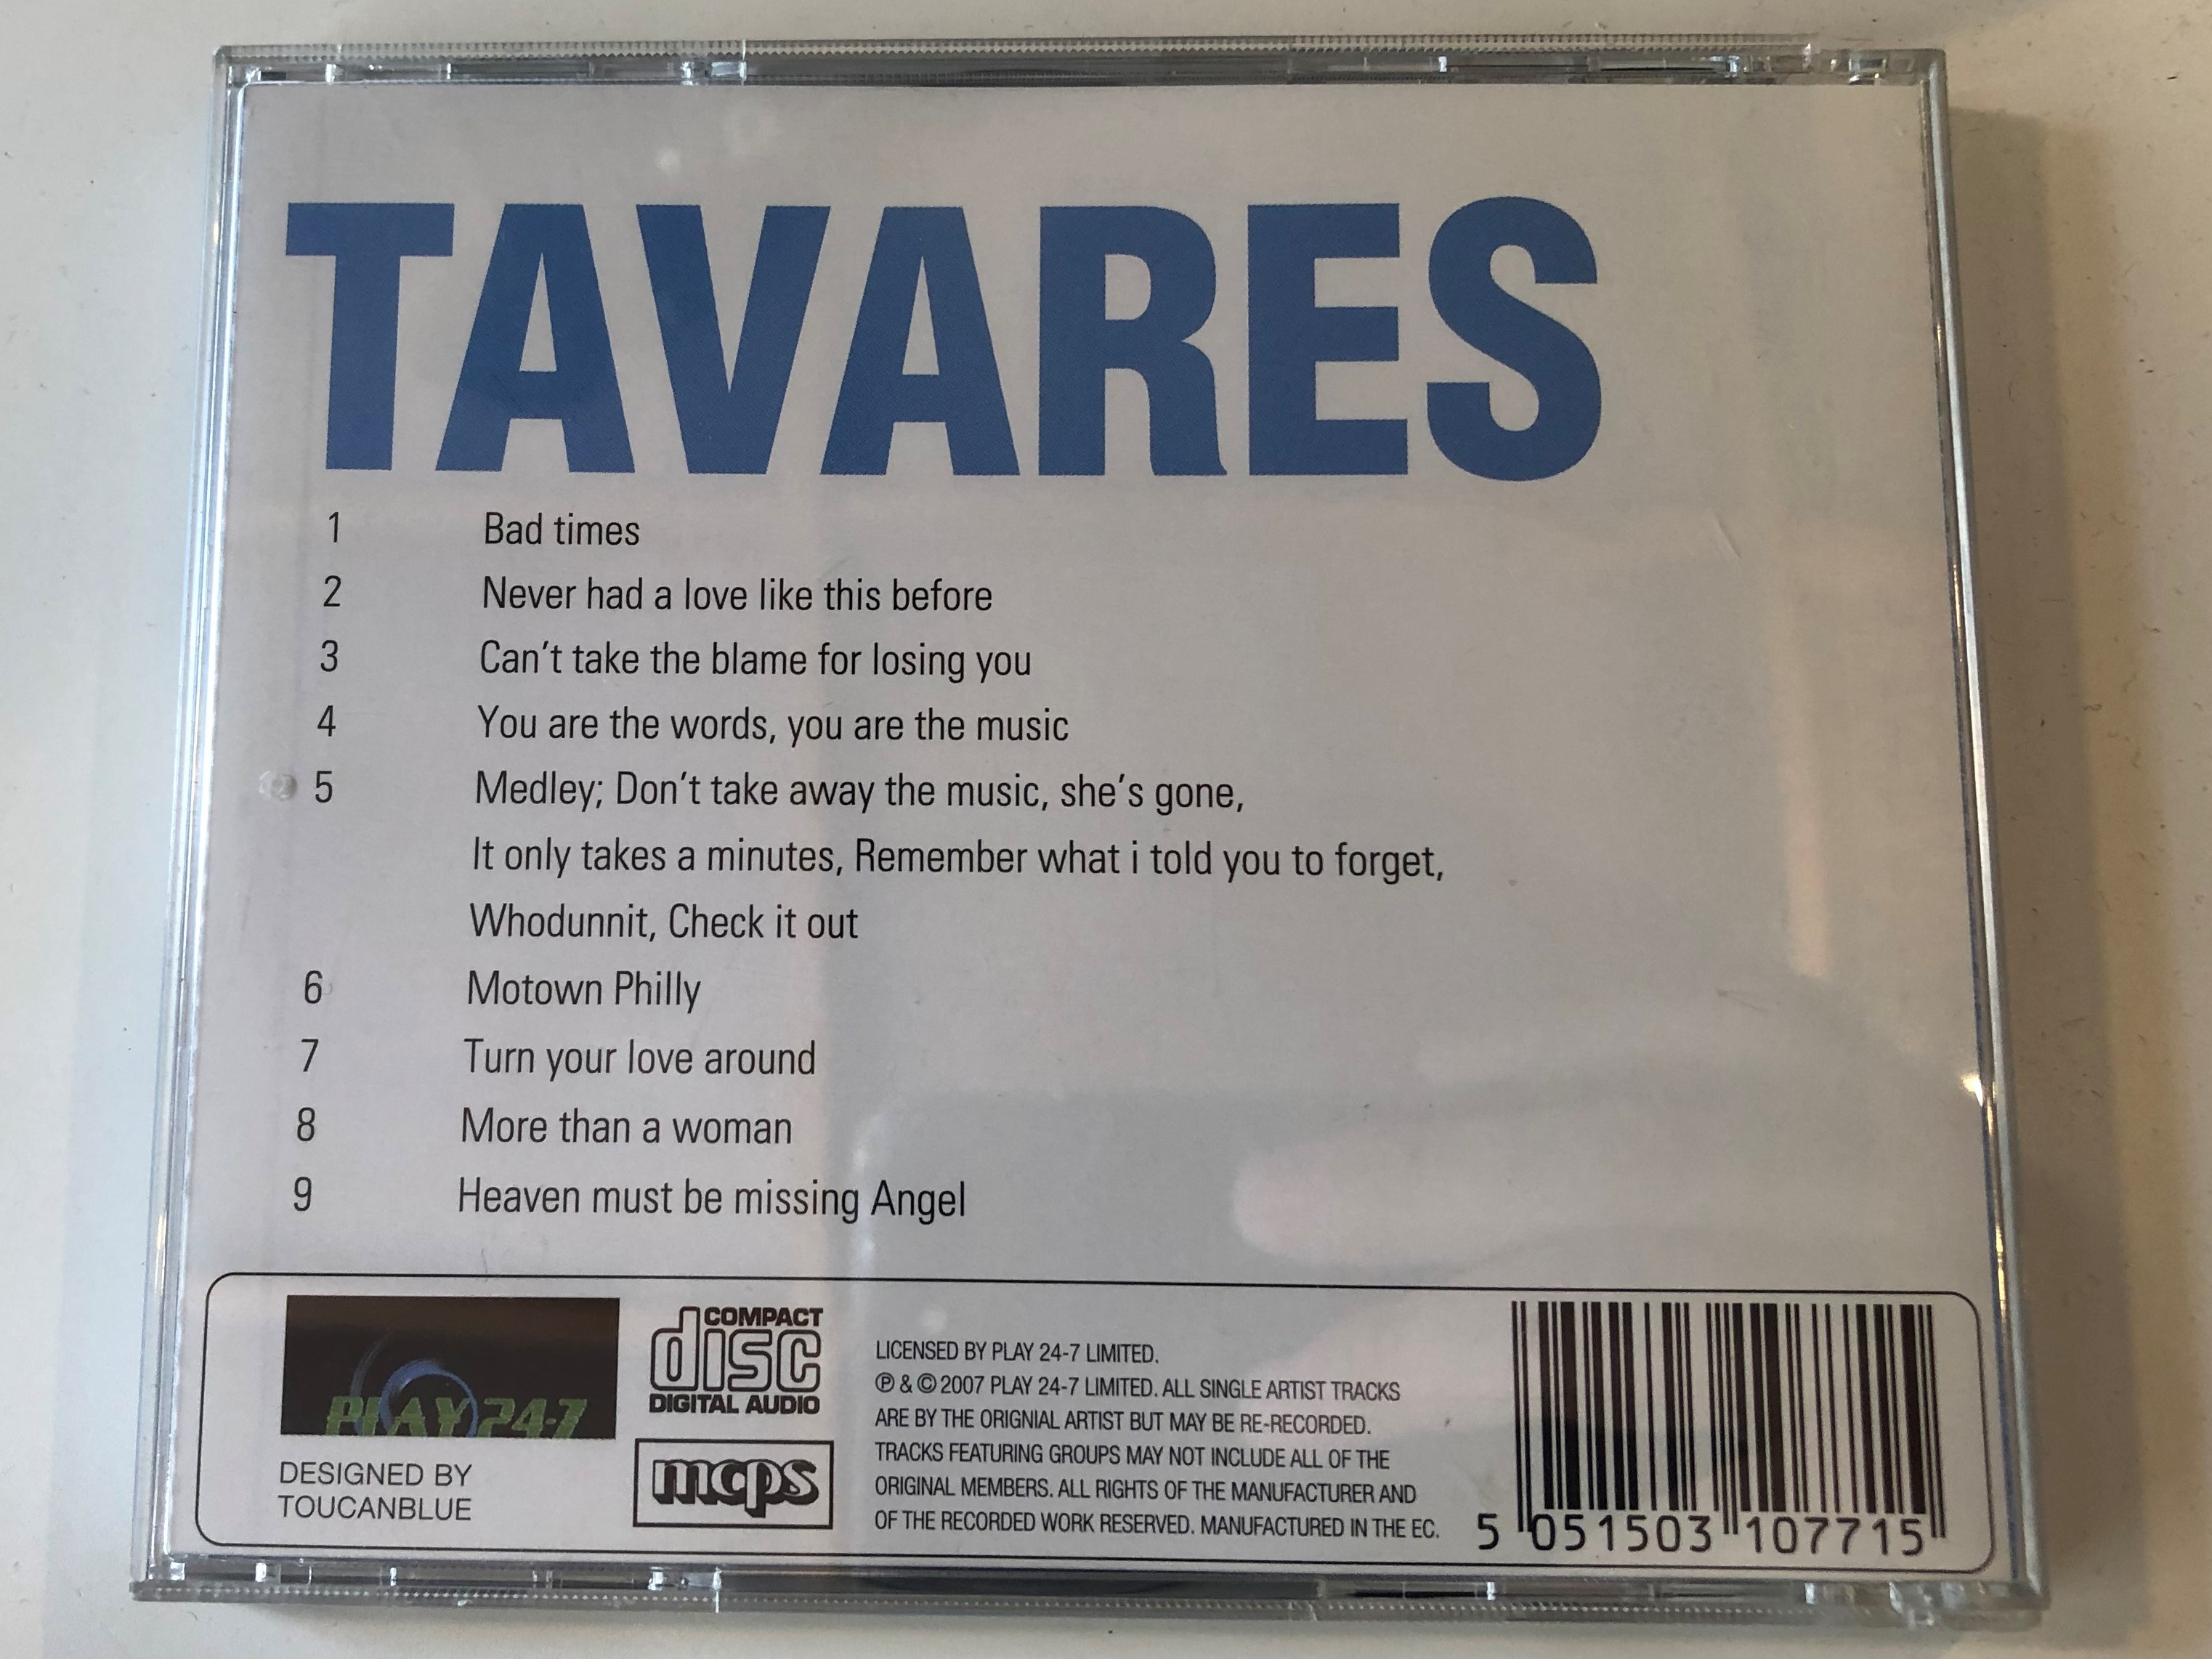 tavares-track-including-mottown-philly-turn-your-love-around-more-than-a-woman-and-heaven-must-be-missing-an-angel-plus-many-more-play-24-7-audio-cd-2007-5051503107715-2-.jpg